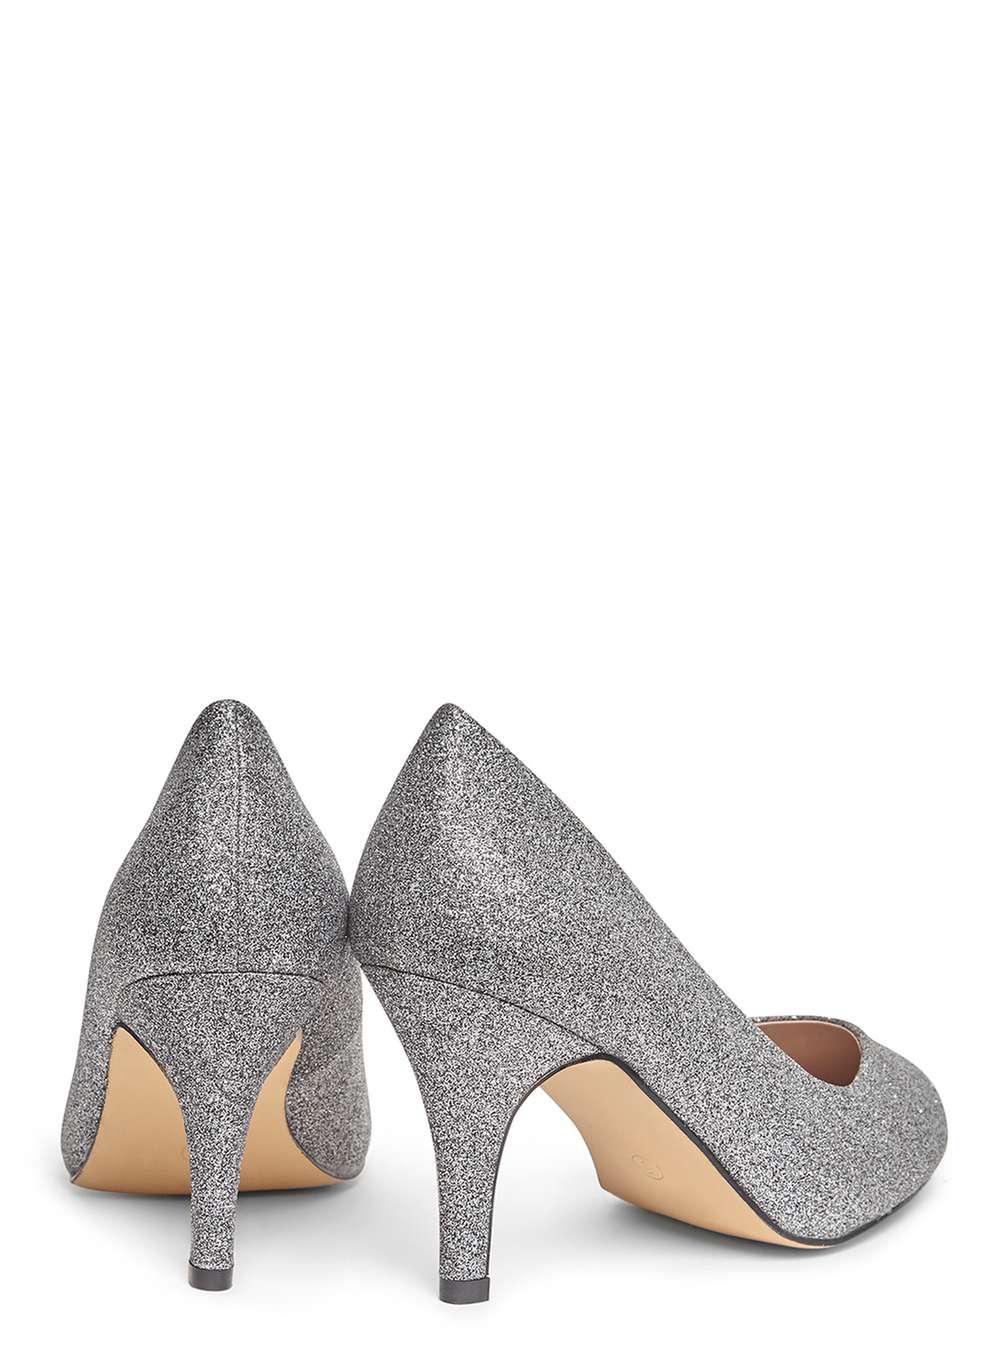 pewter wide fit wedding shoes